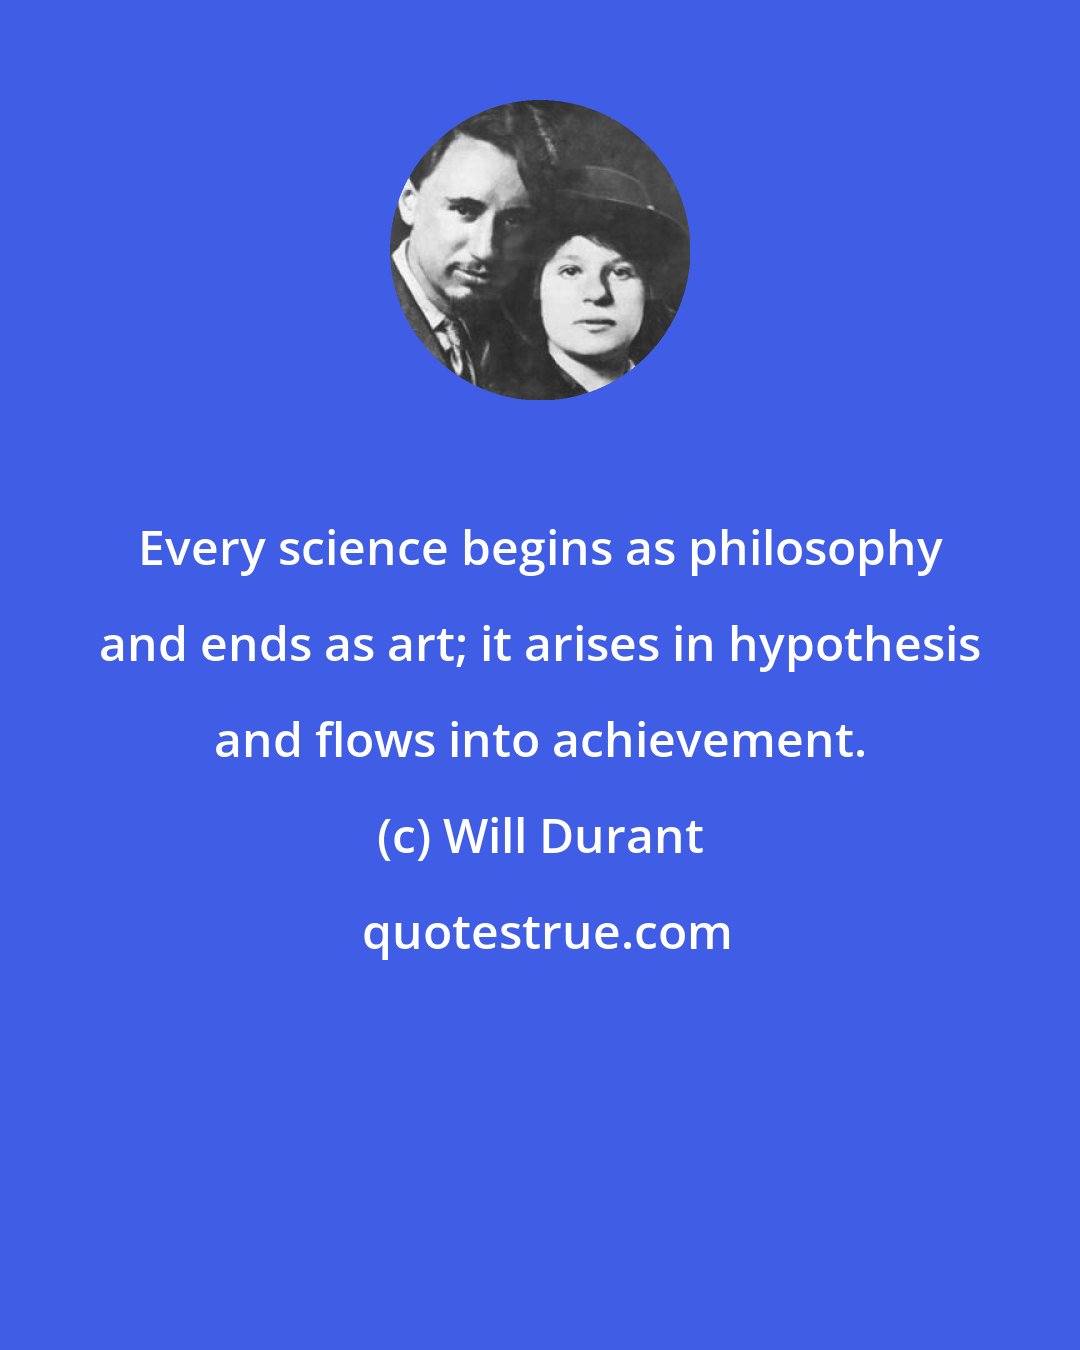 Will Durant: Every science begins as philosophy and ends as art; it arises in hypothesis and flows into achievement.